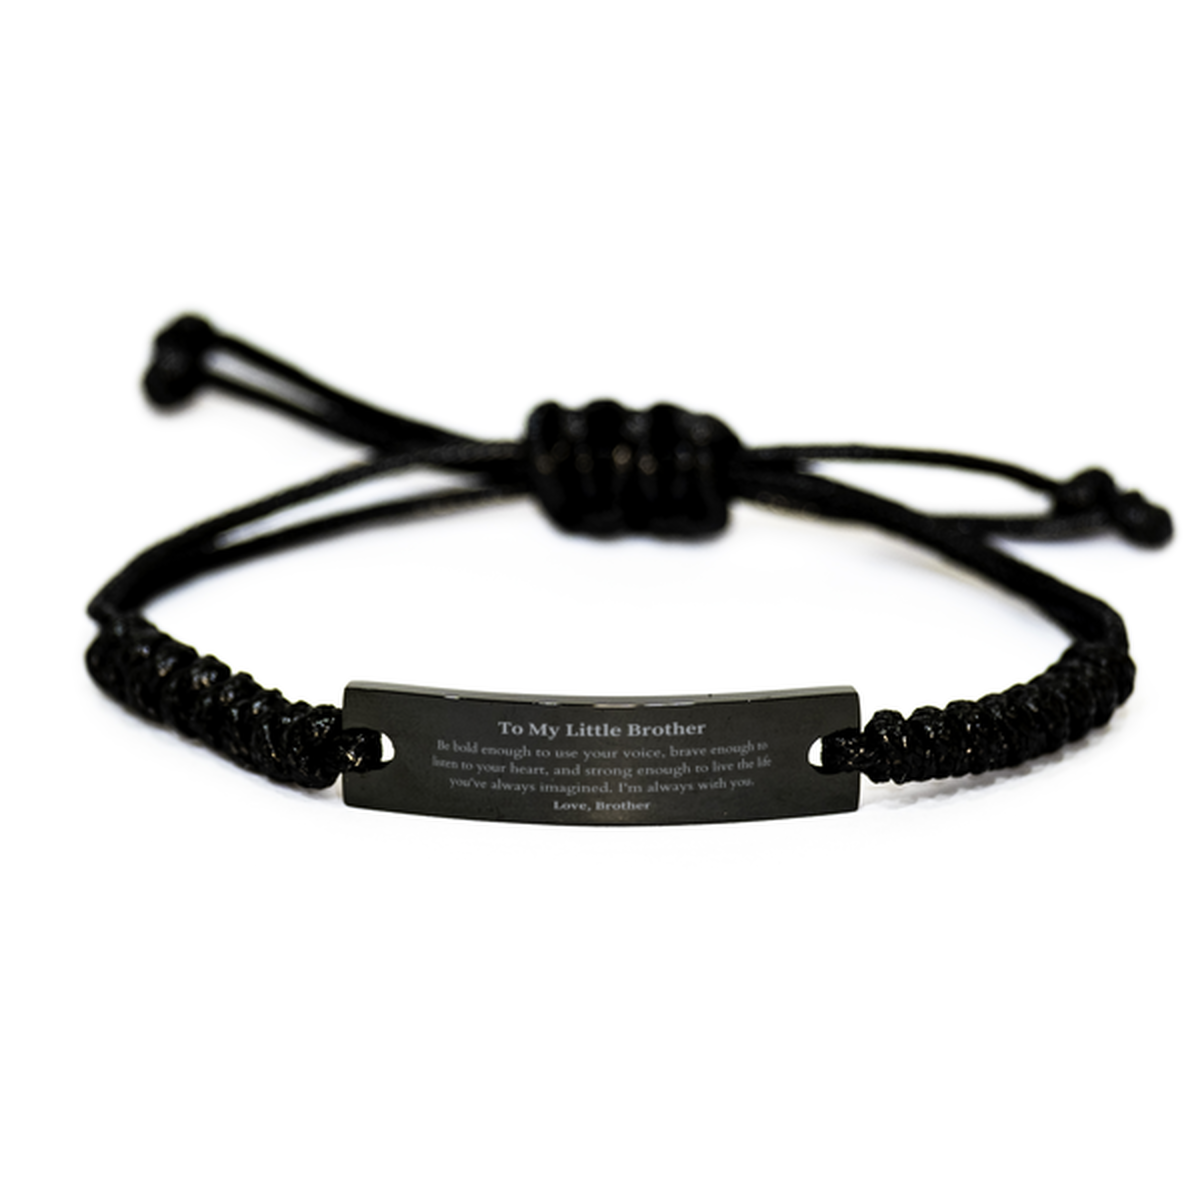 Keepsake Little Brother Black Rope Bracelet Gift Idea Graduation Christmas Birthday Little Brother from Brother, Little Brother Be bold enough to use your voice, brave enough to listen to your heart. Love, Brother